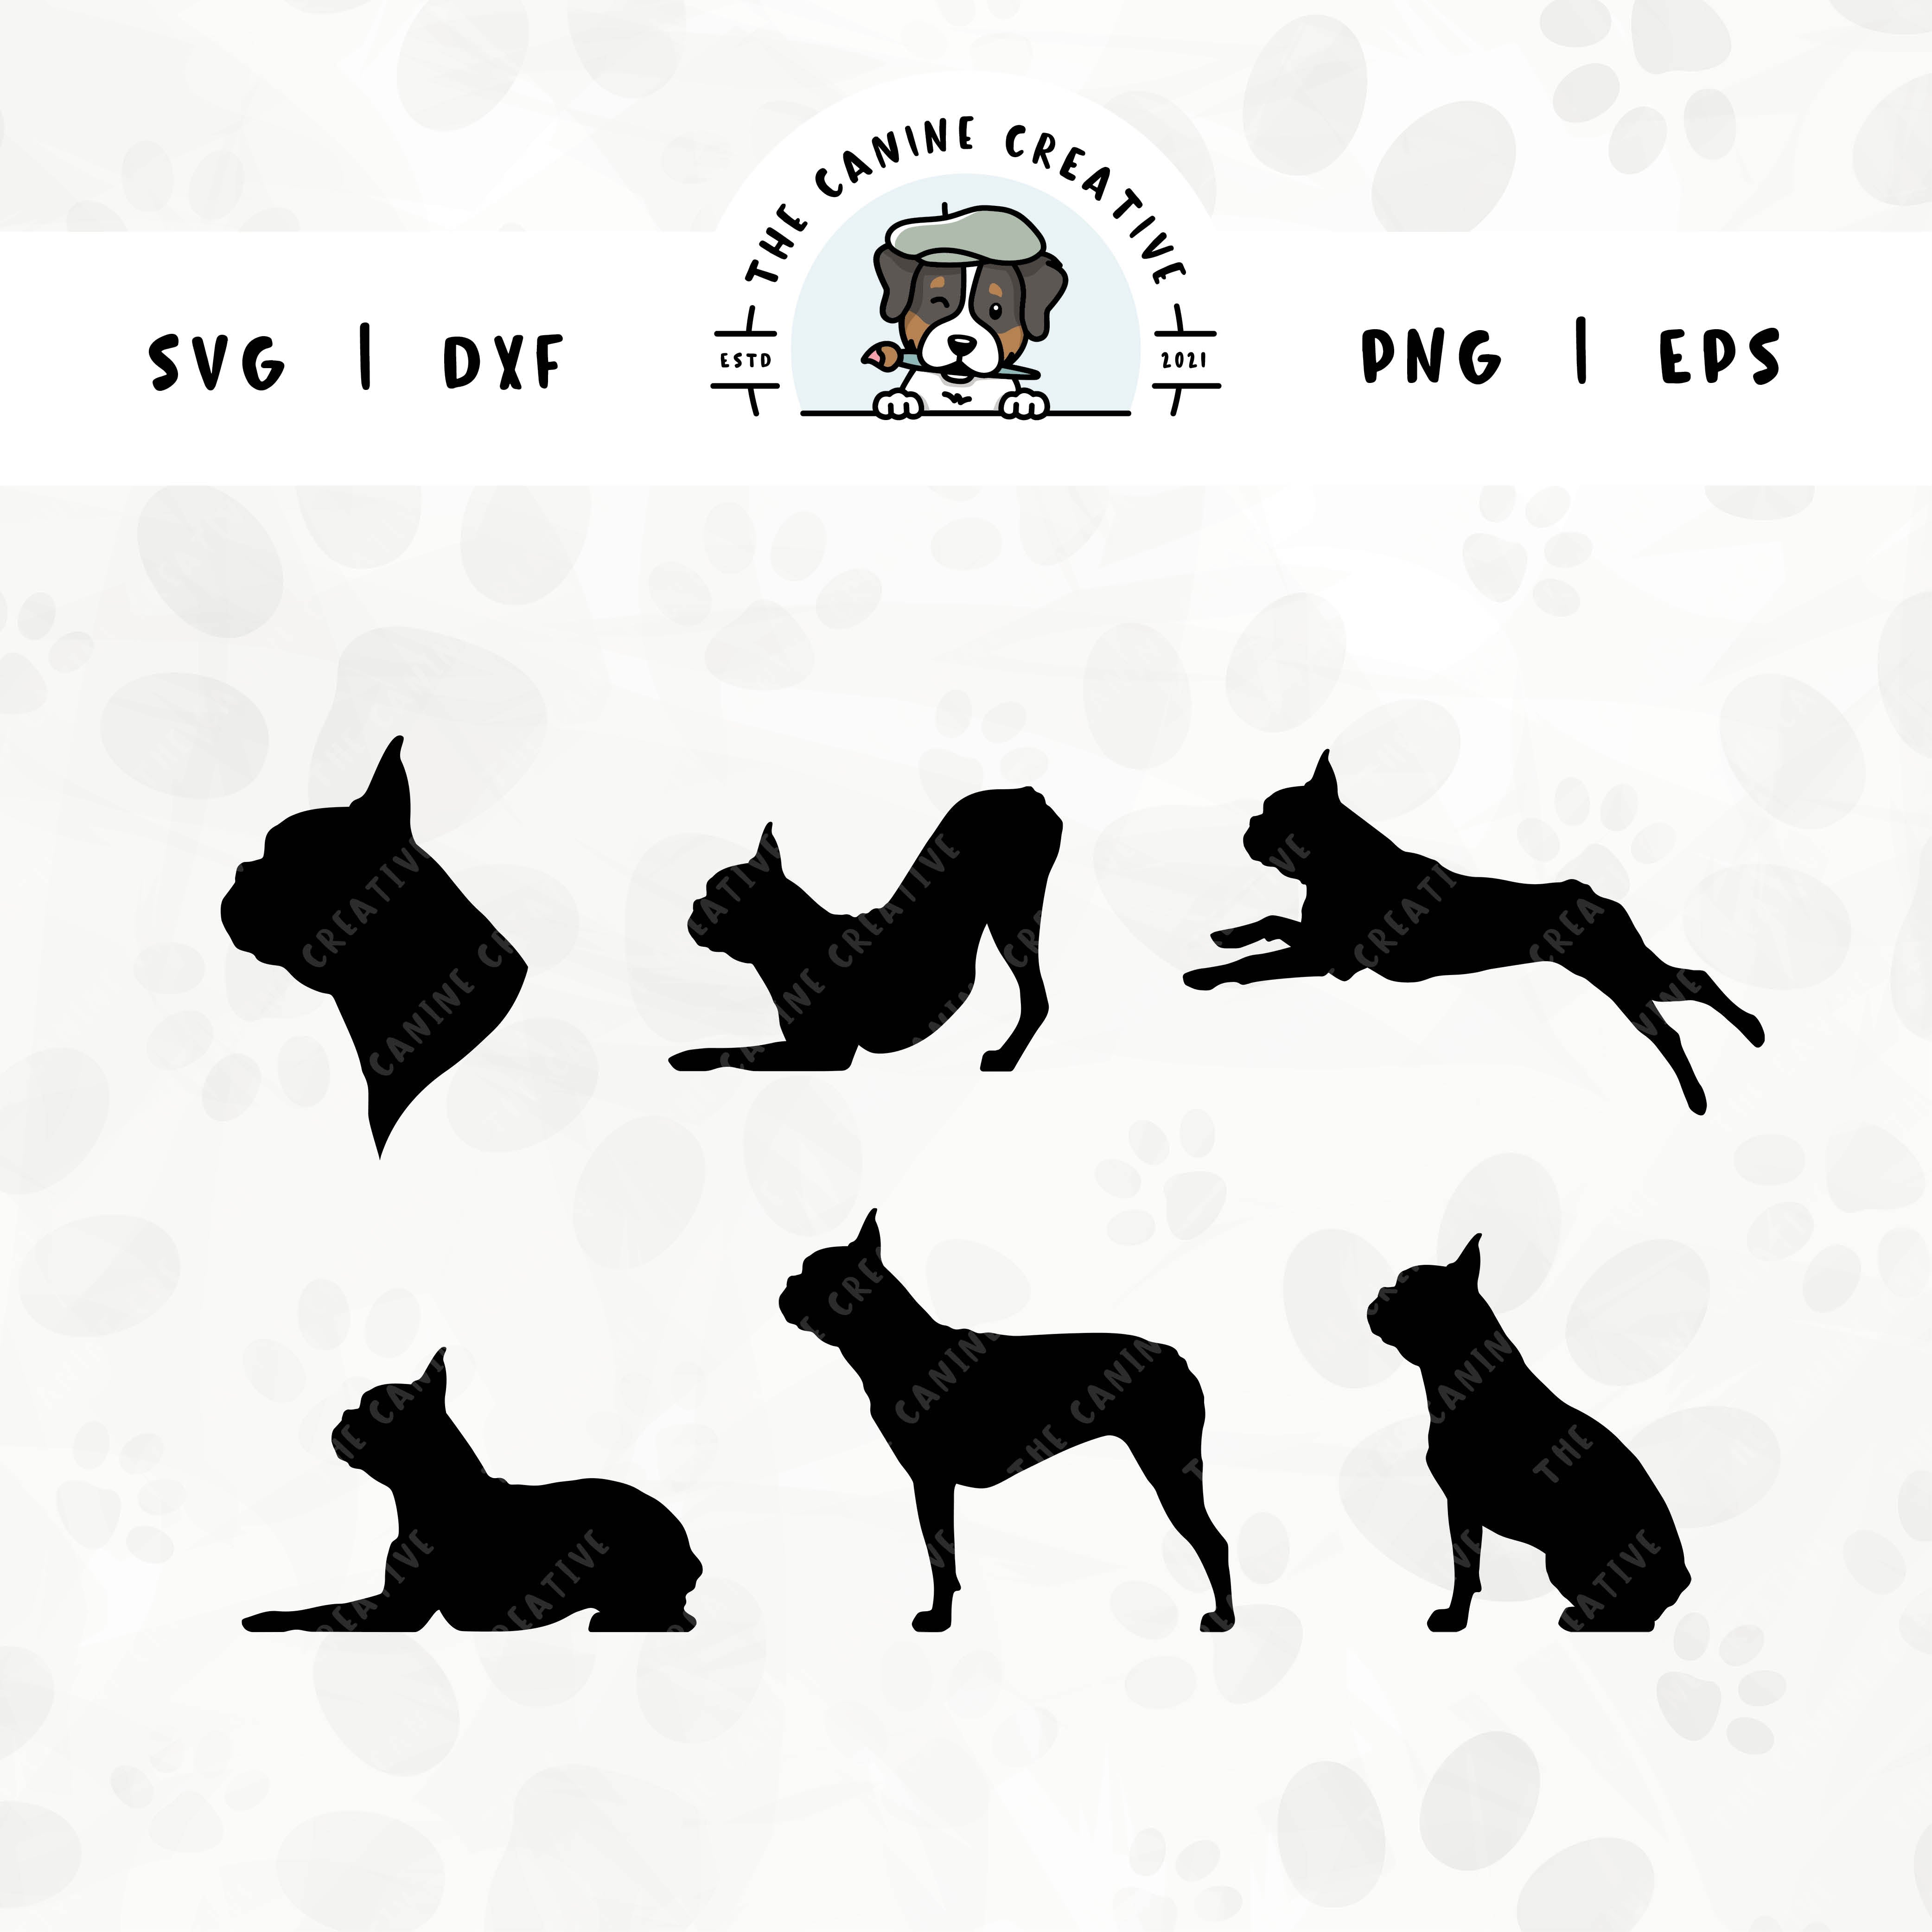 This 6-pack Boston Terrier silhouette bundle (set 1) features a dog's head in profile, along with various poses including running, laying down, playing, standing, and sitting. File formats include: SVG, DXF, PNG, and EPS.